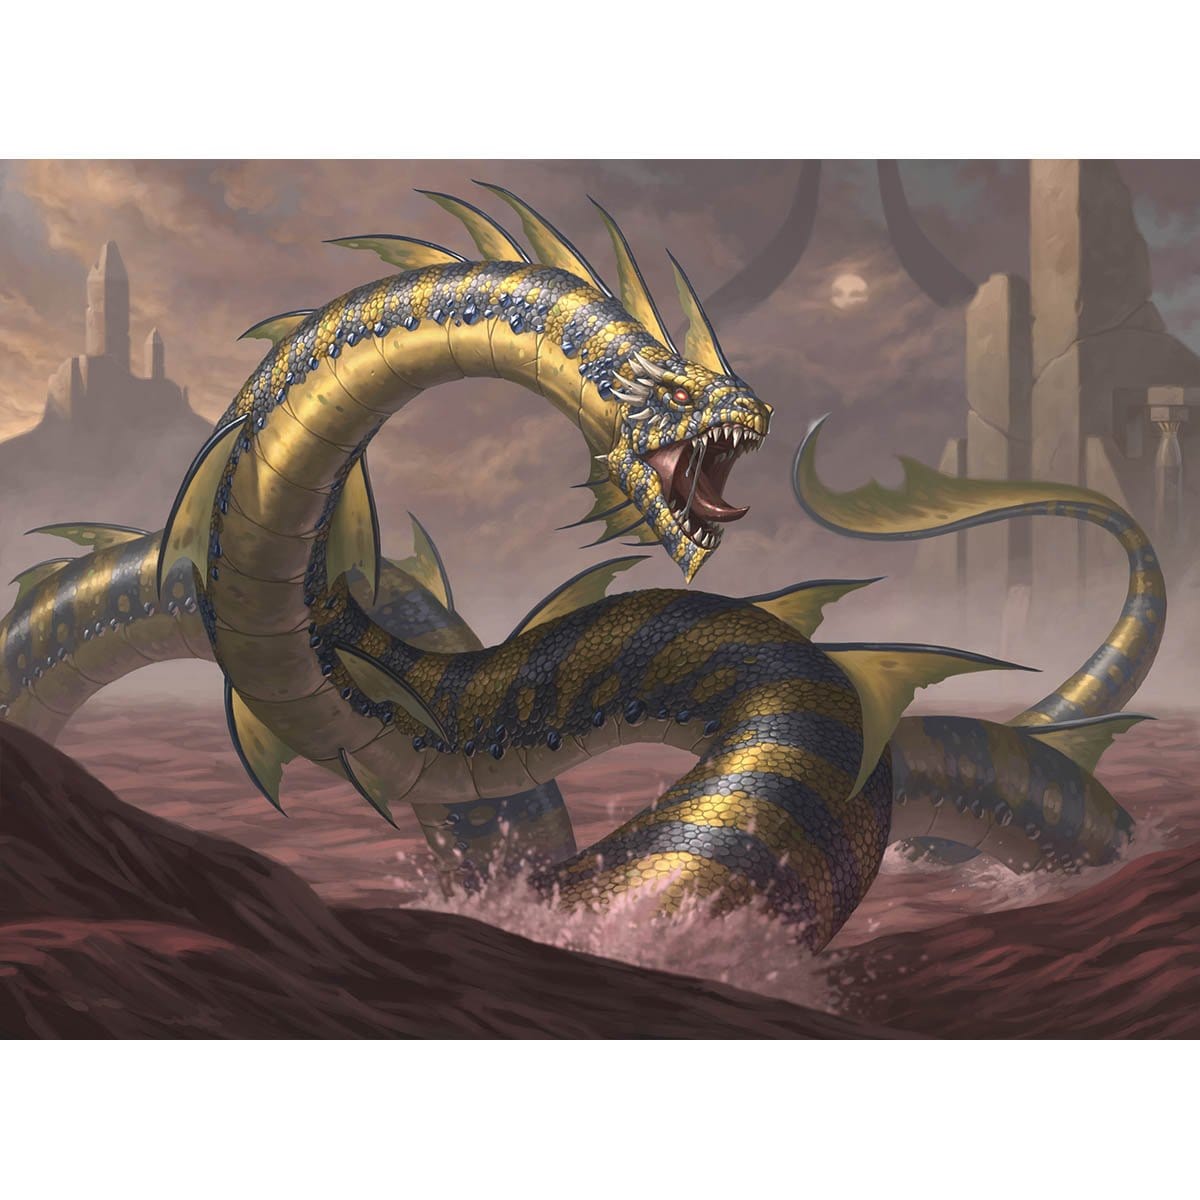 Striped Riverwinder Print - Print - Original Magic Art - Accessories for Magic the Gathering and other card games